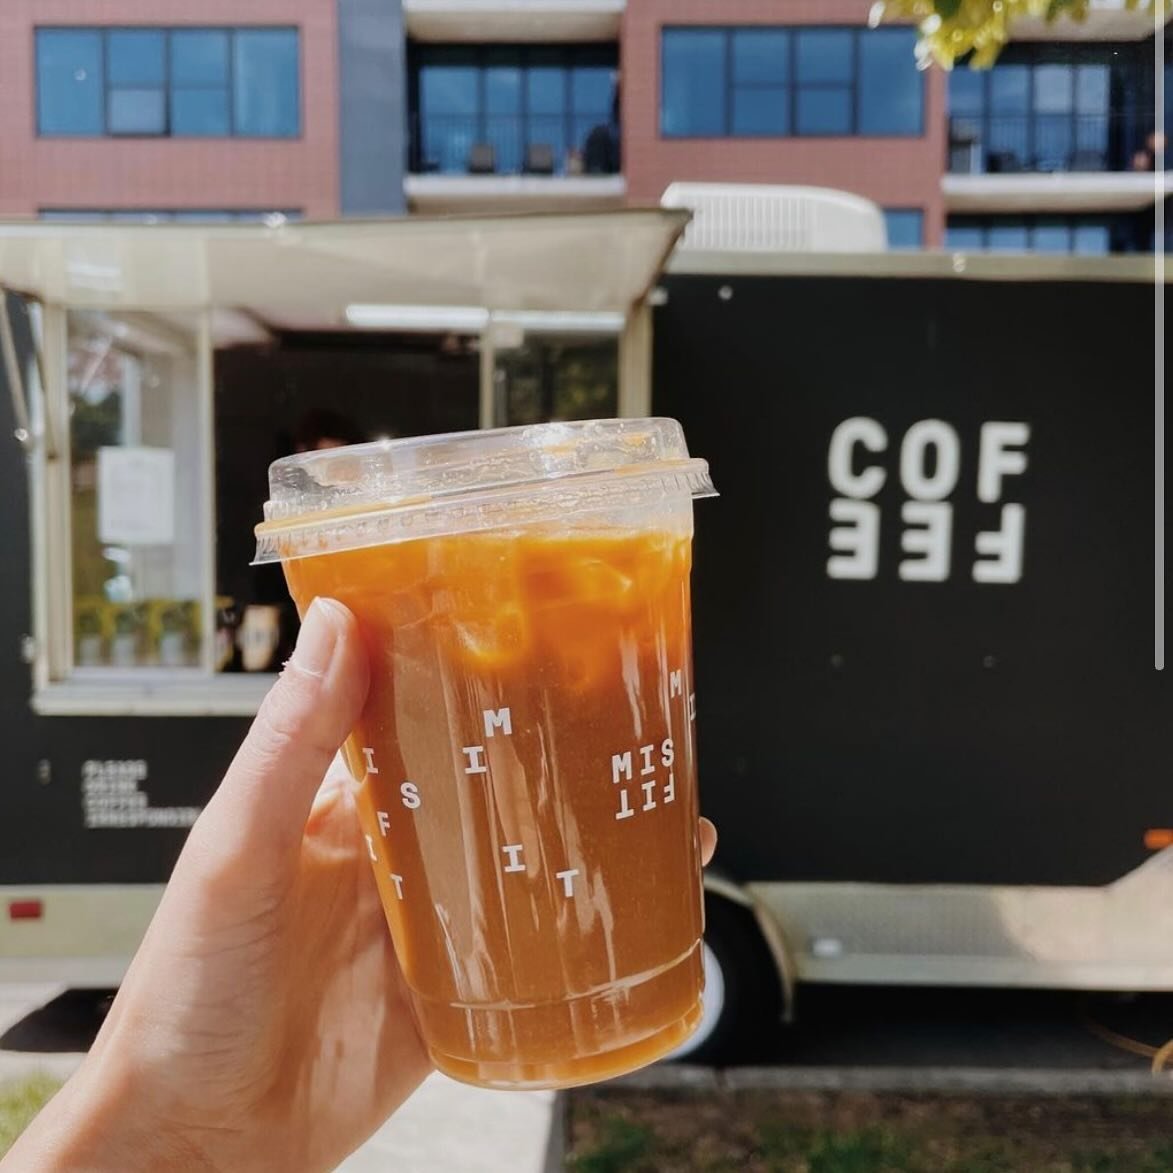 See you at Gold Medal Park tomorrow with all the caffeinated goodies! 8am - 1pm &amp; as always the shop will be crankin the tunes, drinks, and vibes 8am-2pm
#coffeetruck #minneapolis #mobilecoffee #misfit #misfitcoffee